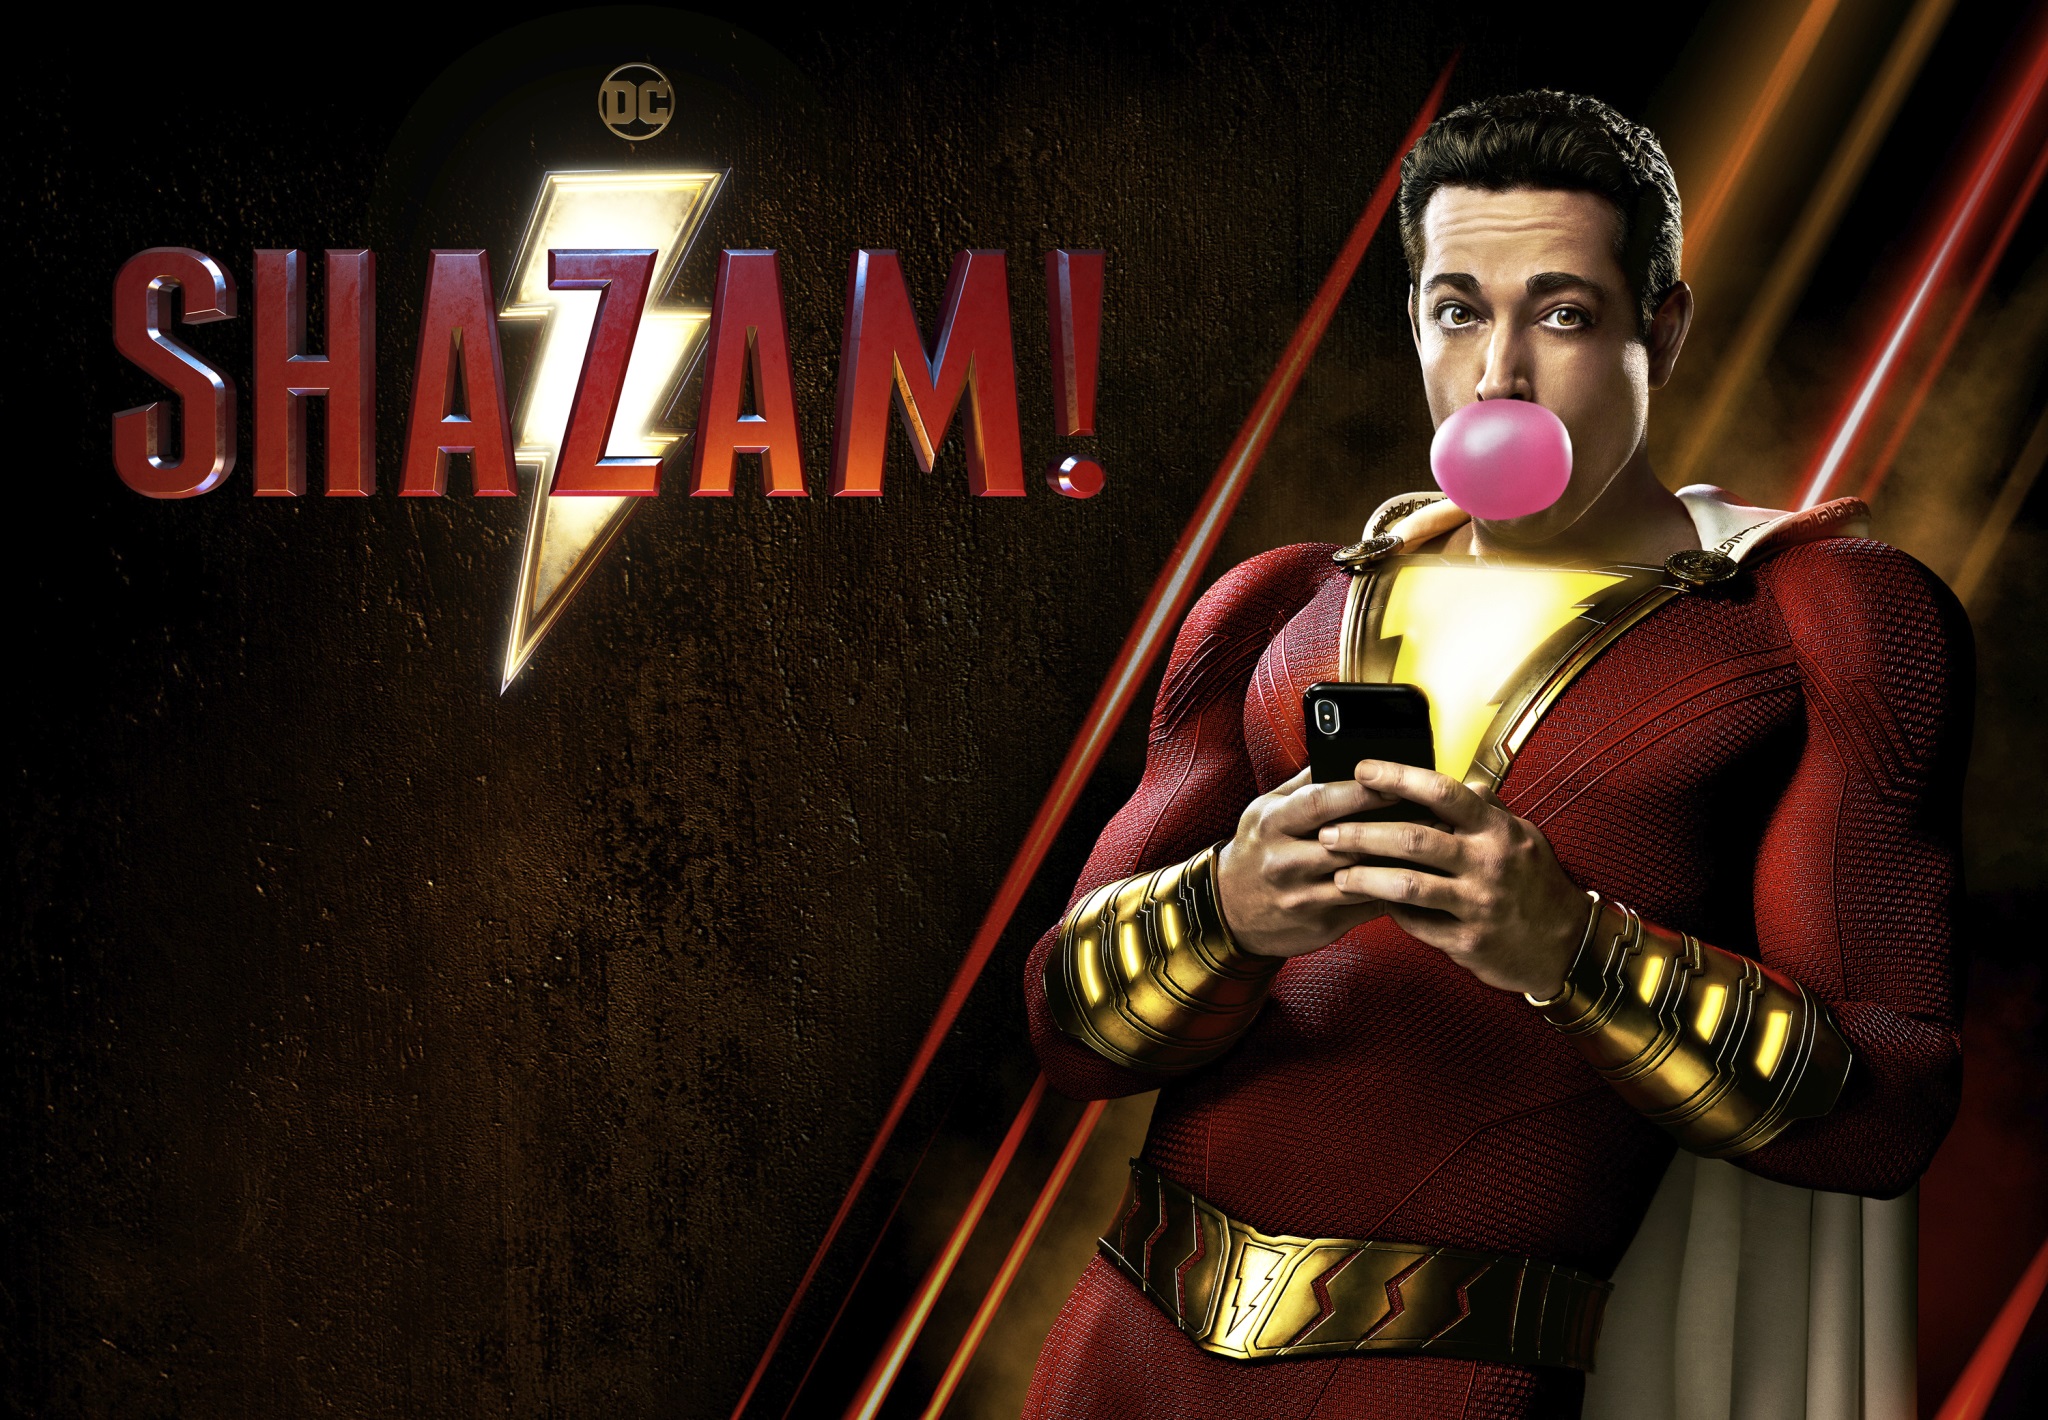 [News] SHAZAM! Soundtrack Will Be Released April 5!